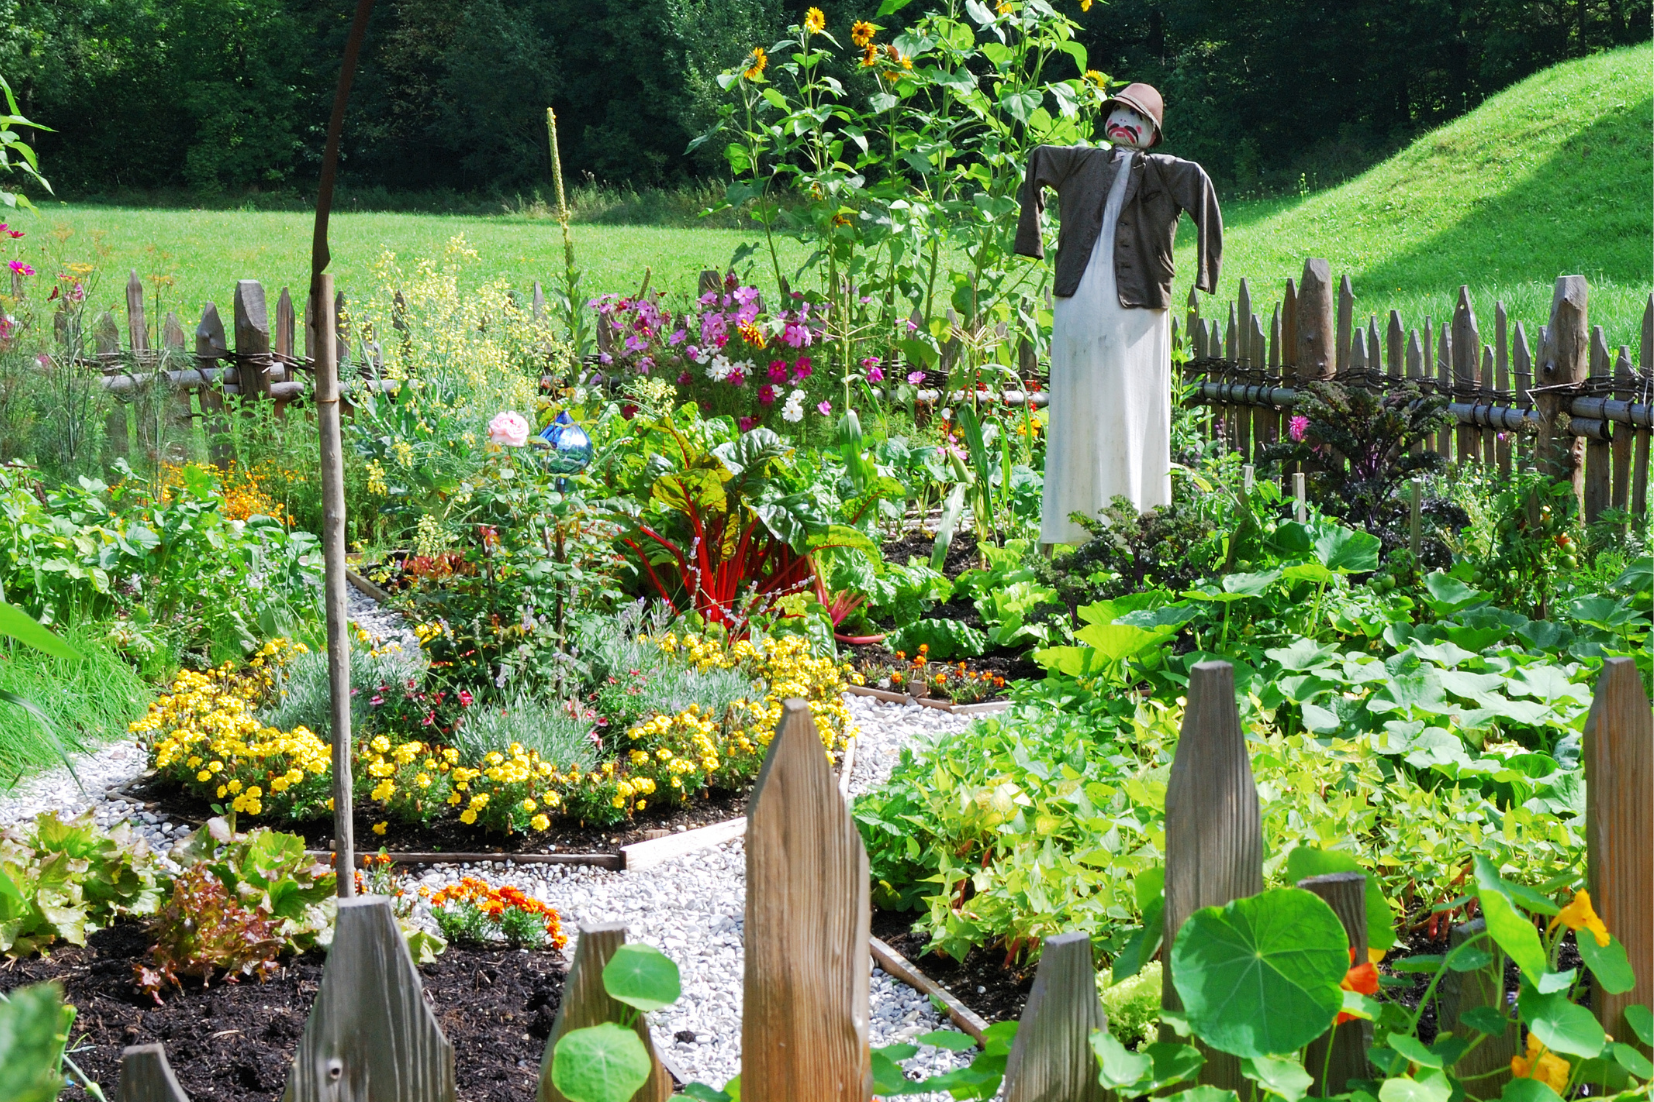 Eco-Friendly options to reduce pests in the garden